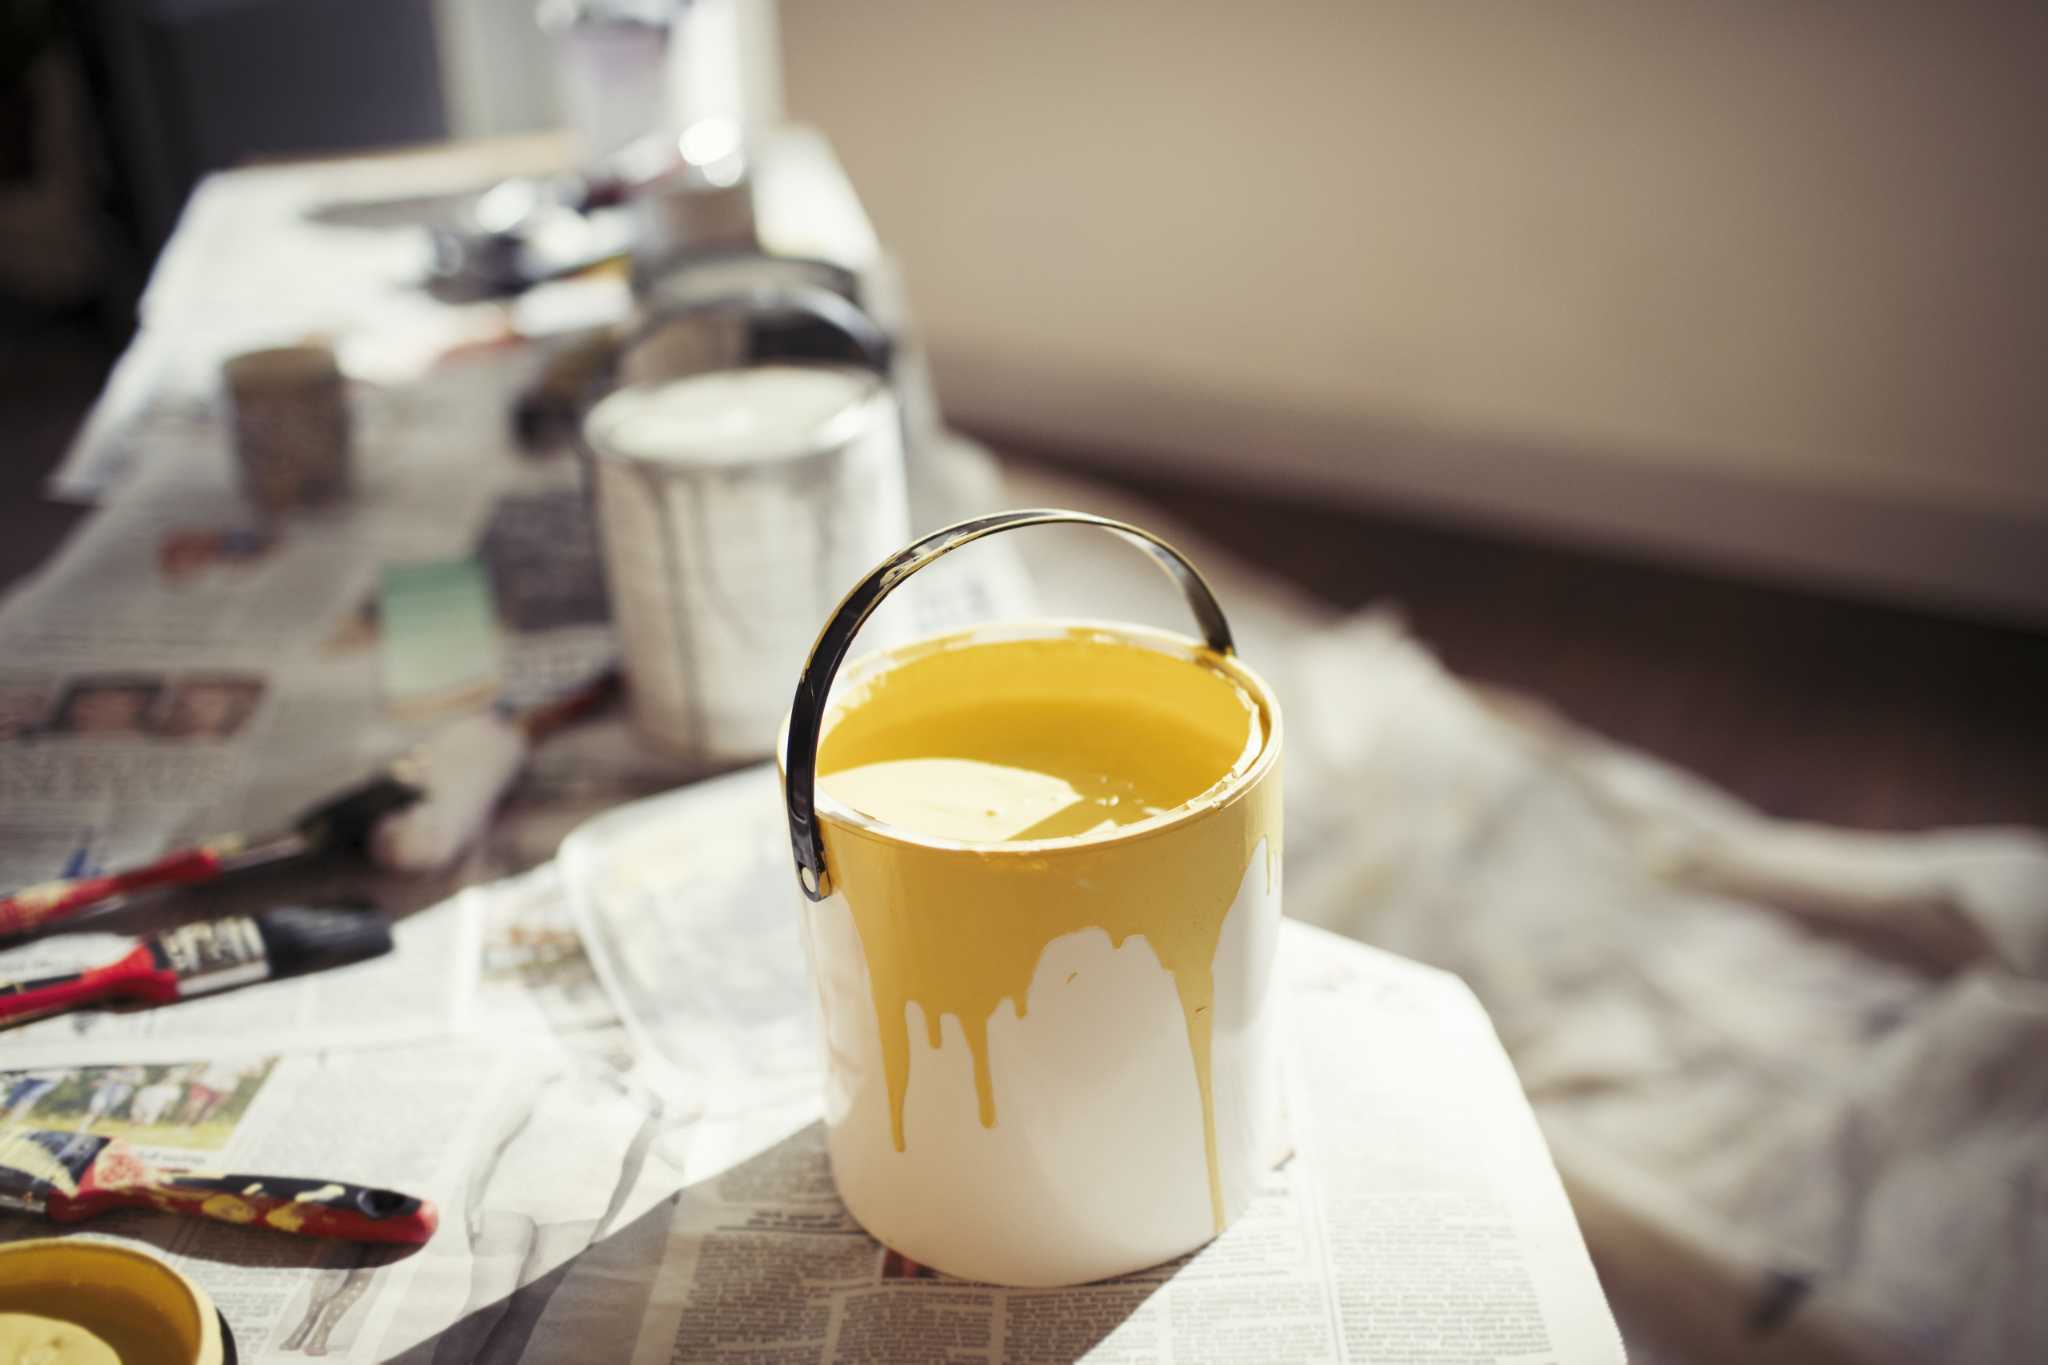 How to Thin Latex Paint (No Paint Thinner Required) - Bob Vila